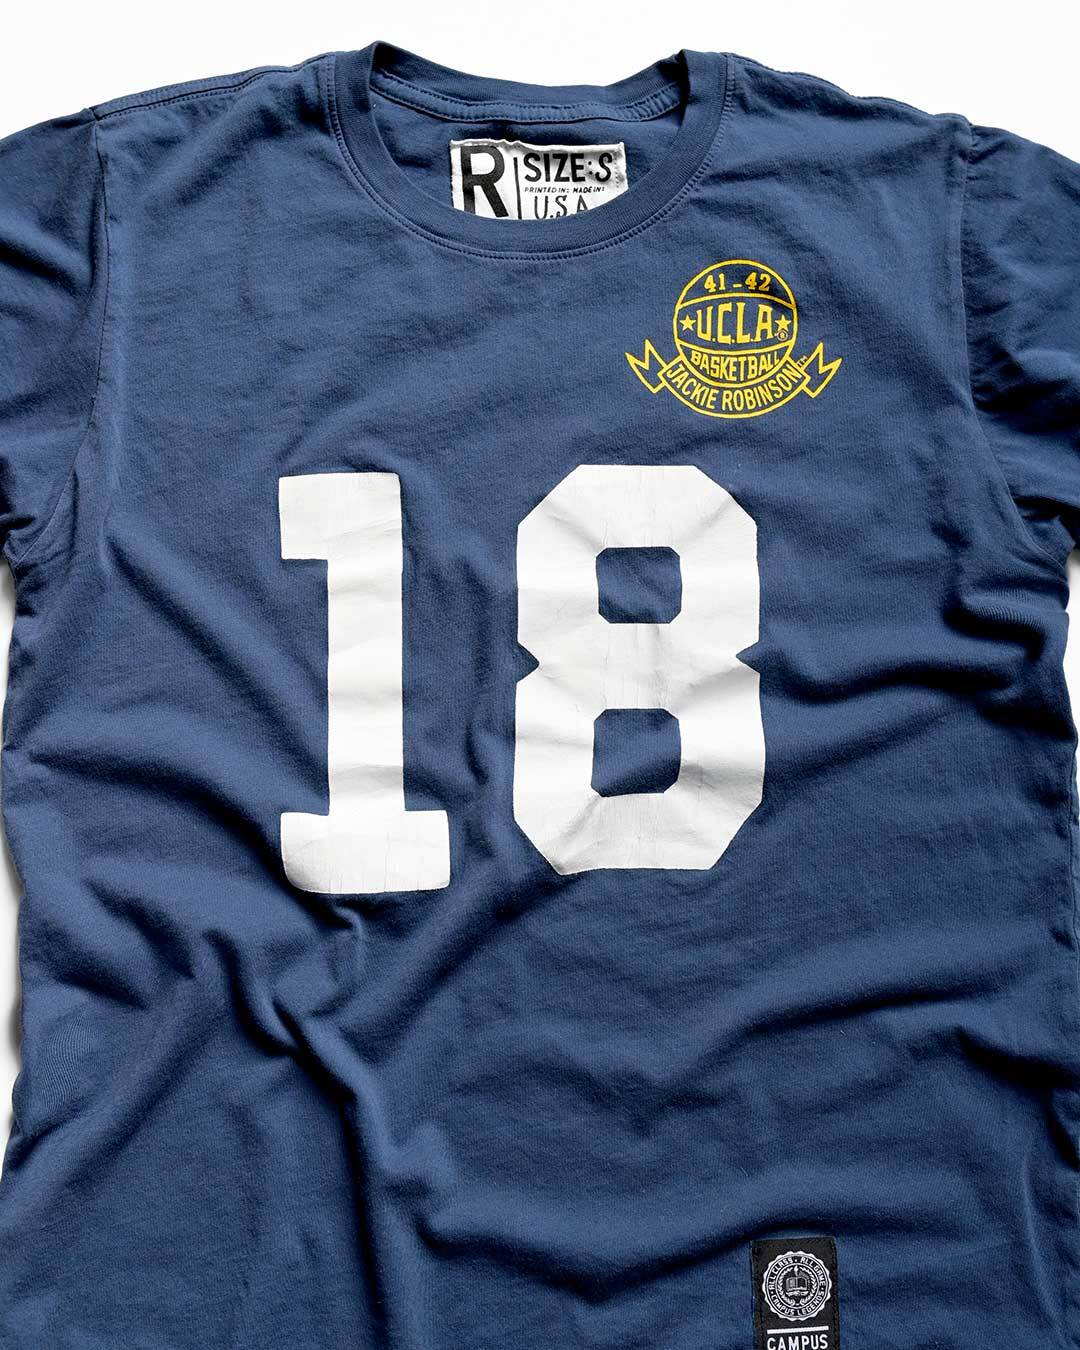 UCLA - Jackie Robinson Basketball #18 Navy Tee - Roots of Fight